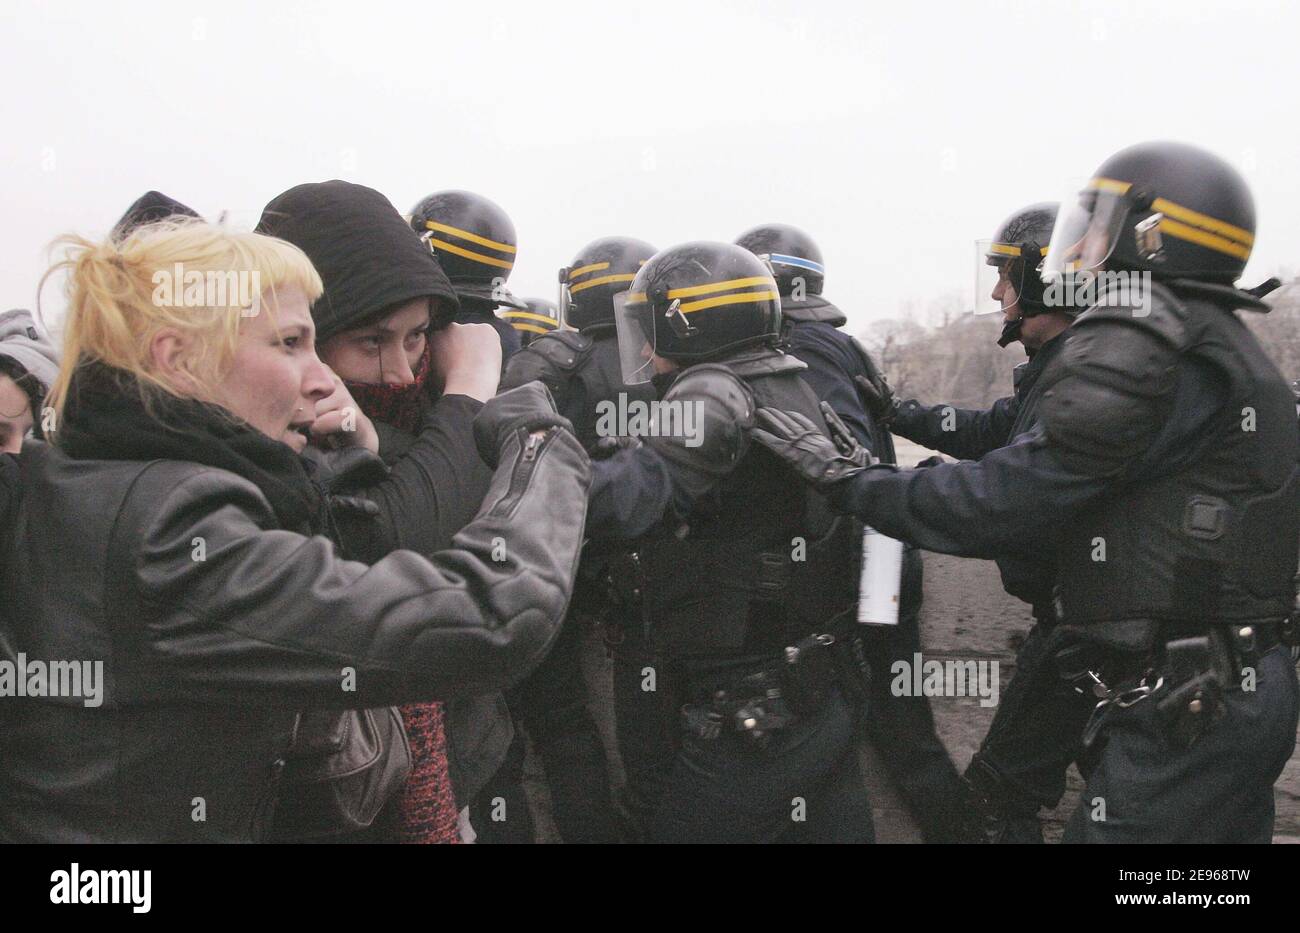 Violent riots between youg people and police forces happen apart anti-CPE students demonstration near Invalides Square in Paris, France on March 23, 2006. Photo by Taamallah-Mousse/ABACAPRESS.COM Stock Photo